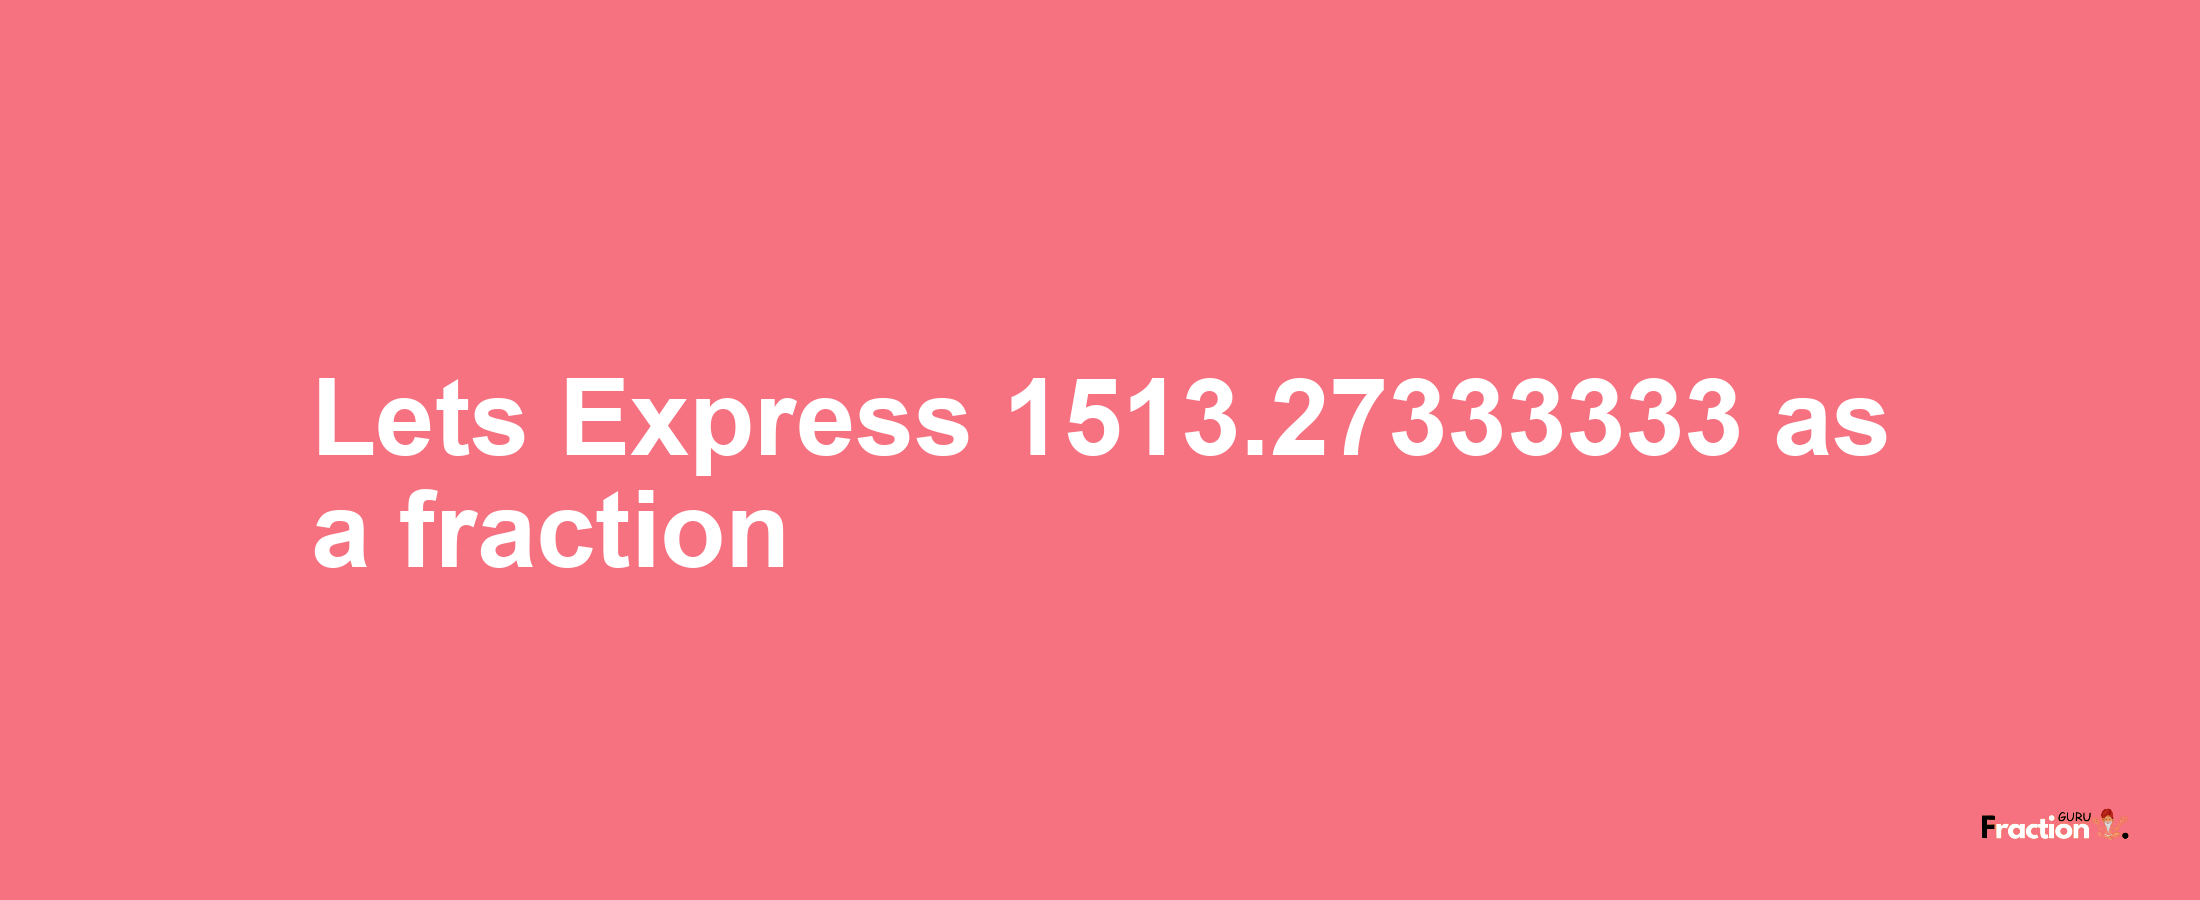 Lets Express 1513.27333333 as afraction